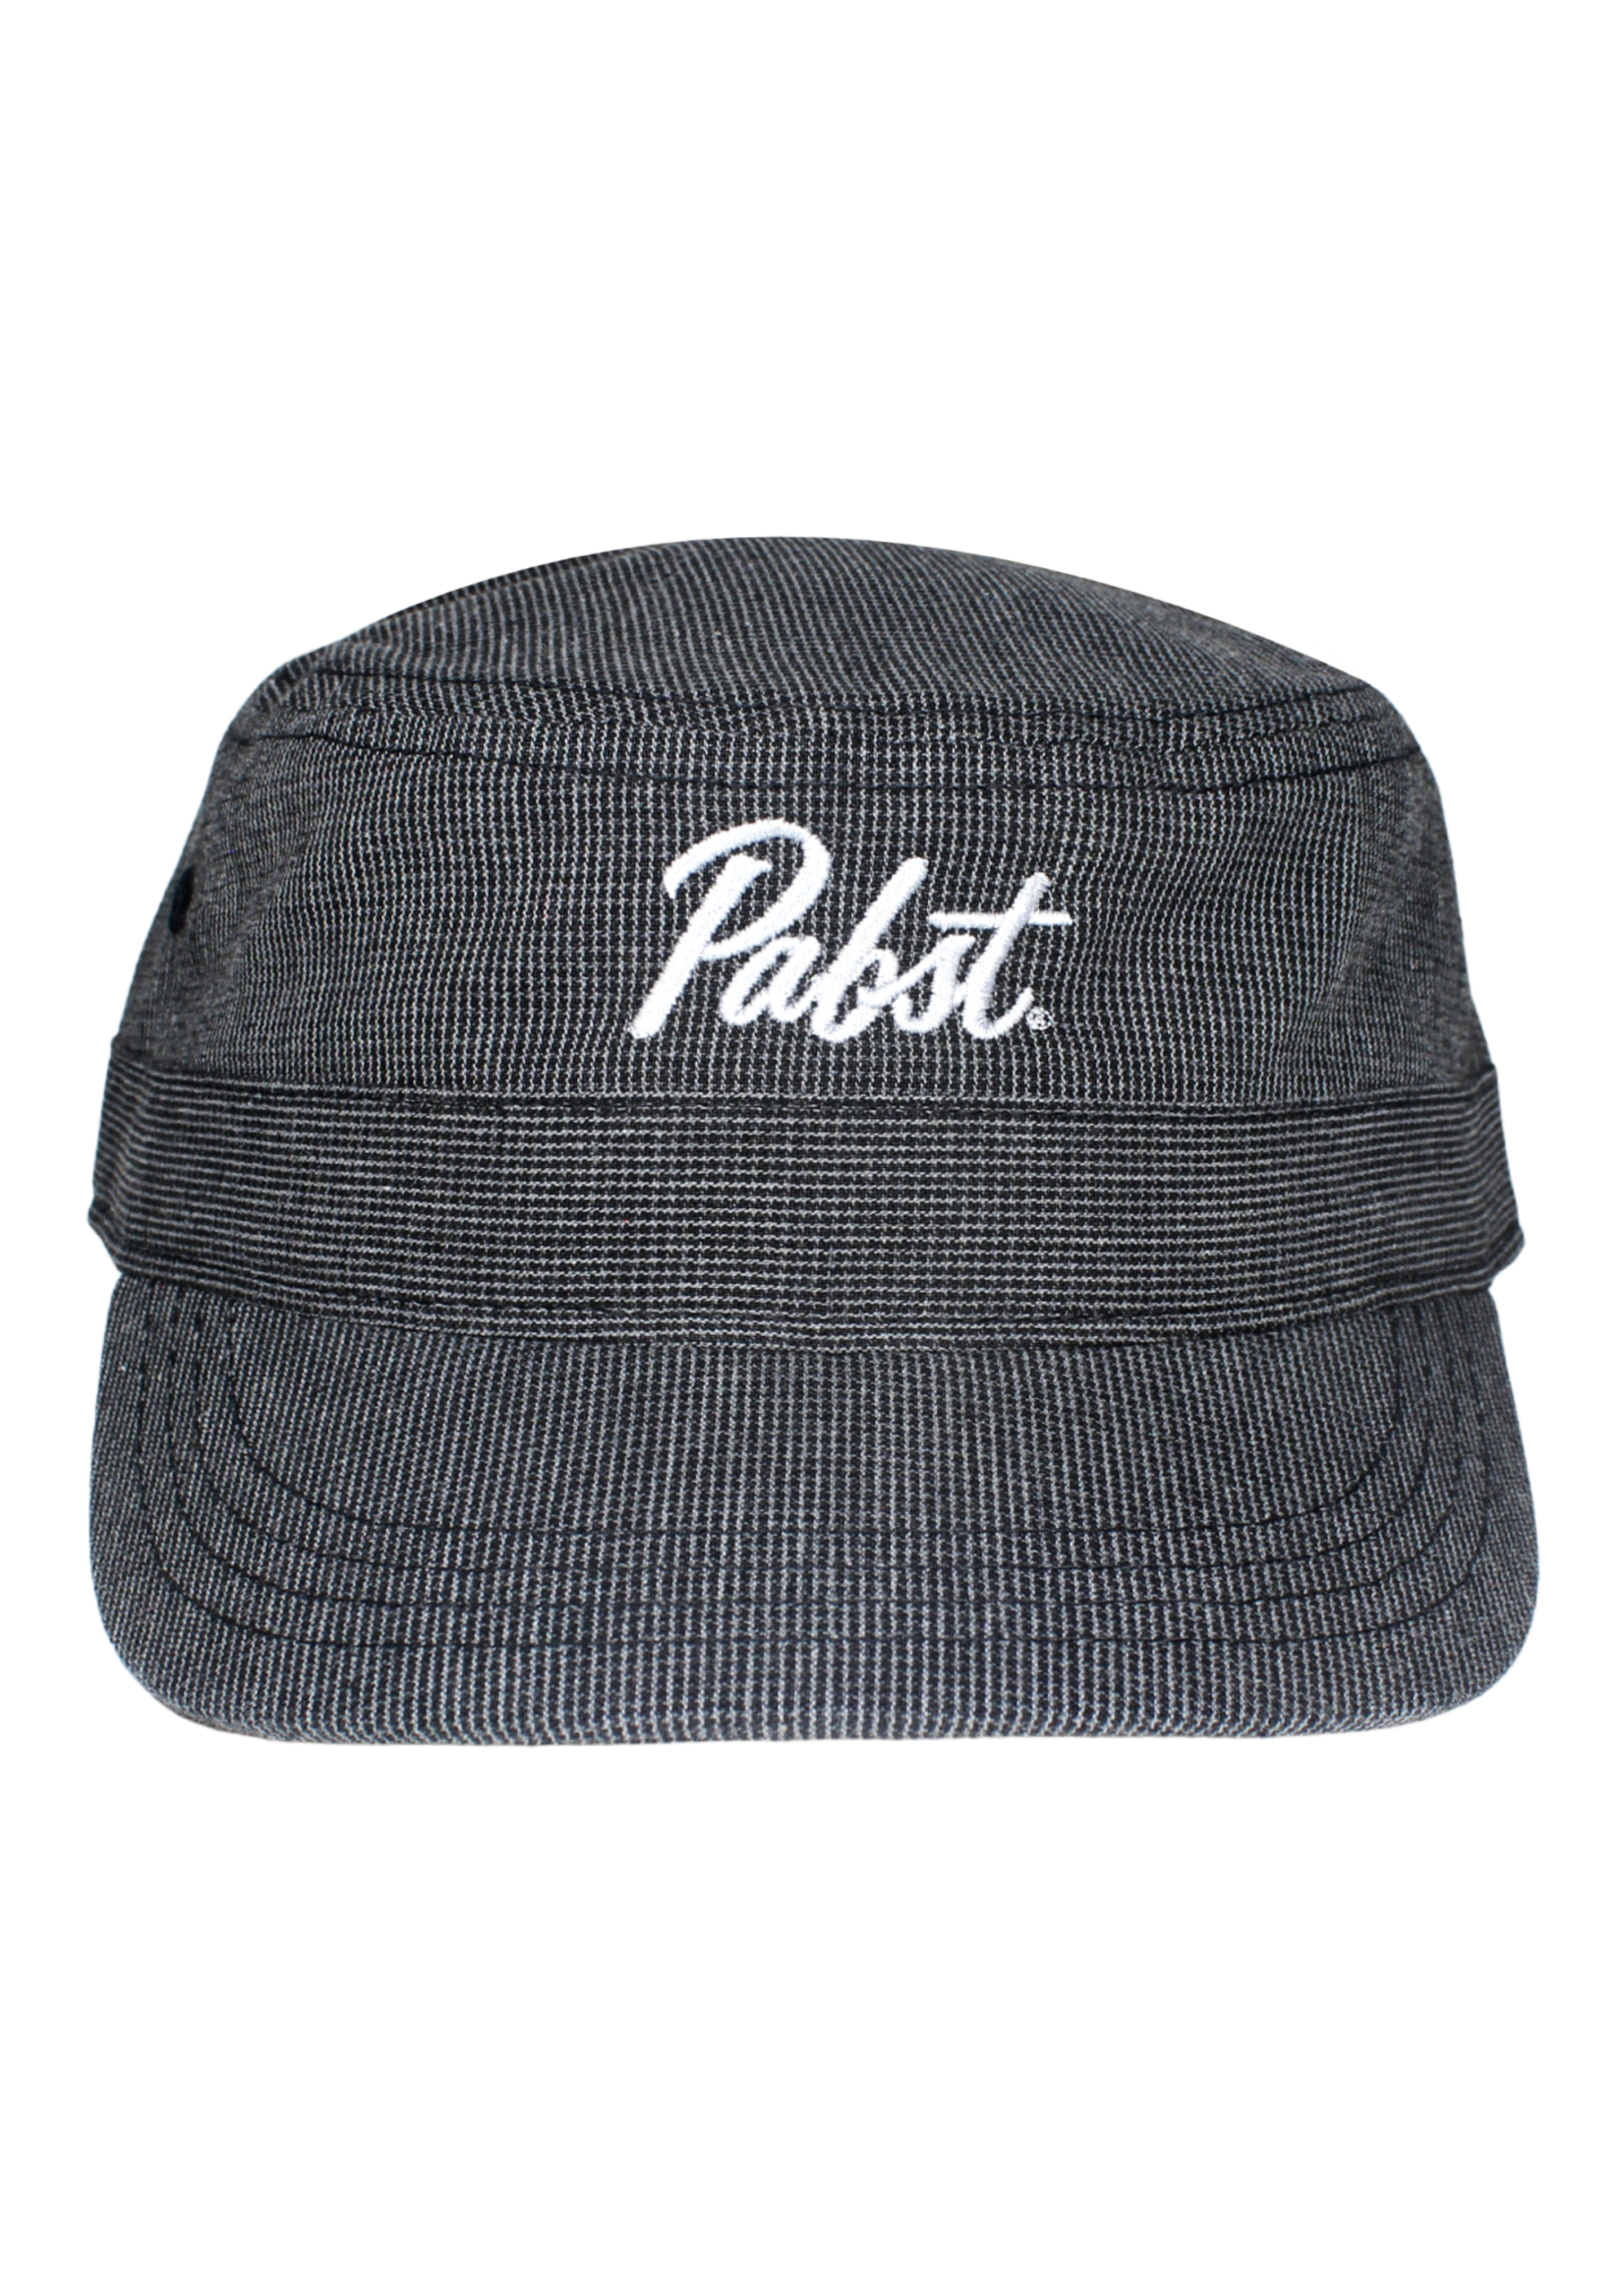 Pabst Pabst Houndstooth Cadet Hat